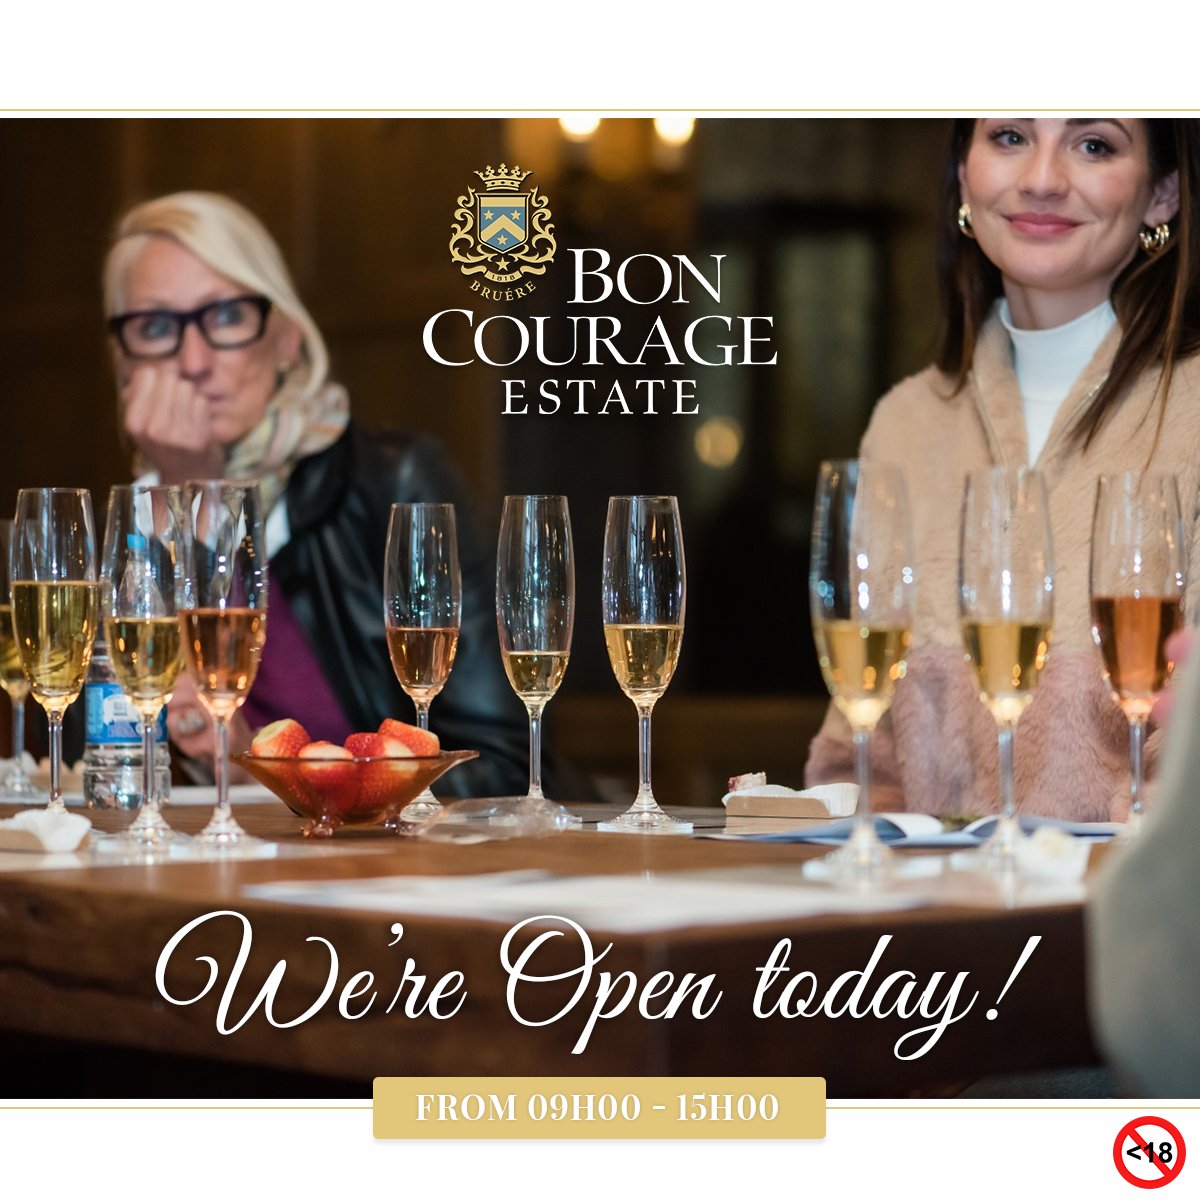 VISIT US & enjoy 𝐭𝐡𝐞 𝐟𝐢𝐧𝐞𝐬𝐭 𝐨𝐟 𝐭𝐡𝐞 𝐰𝐢𝐧𝐞𝐥𝐚𝐧𝐝𝐬! 🌱🍇🍷 OPEN TODAY 09h00 - 15h00 #boncourage #exceptionalquality #wine #tasting #easterweekend #familyday #holidays